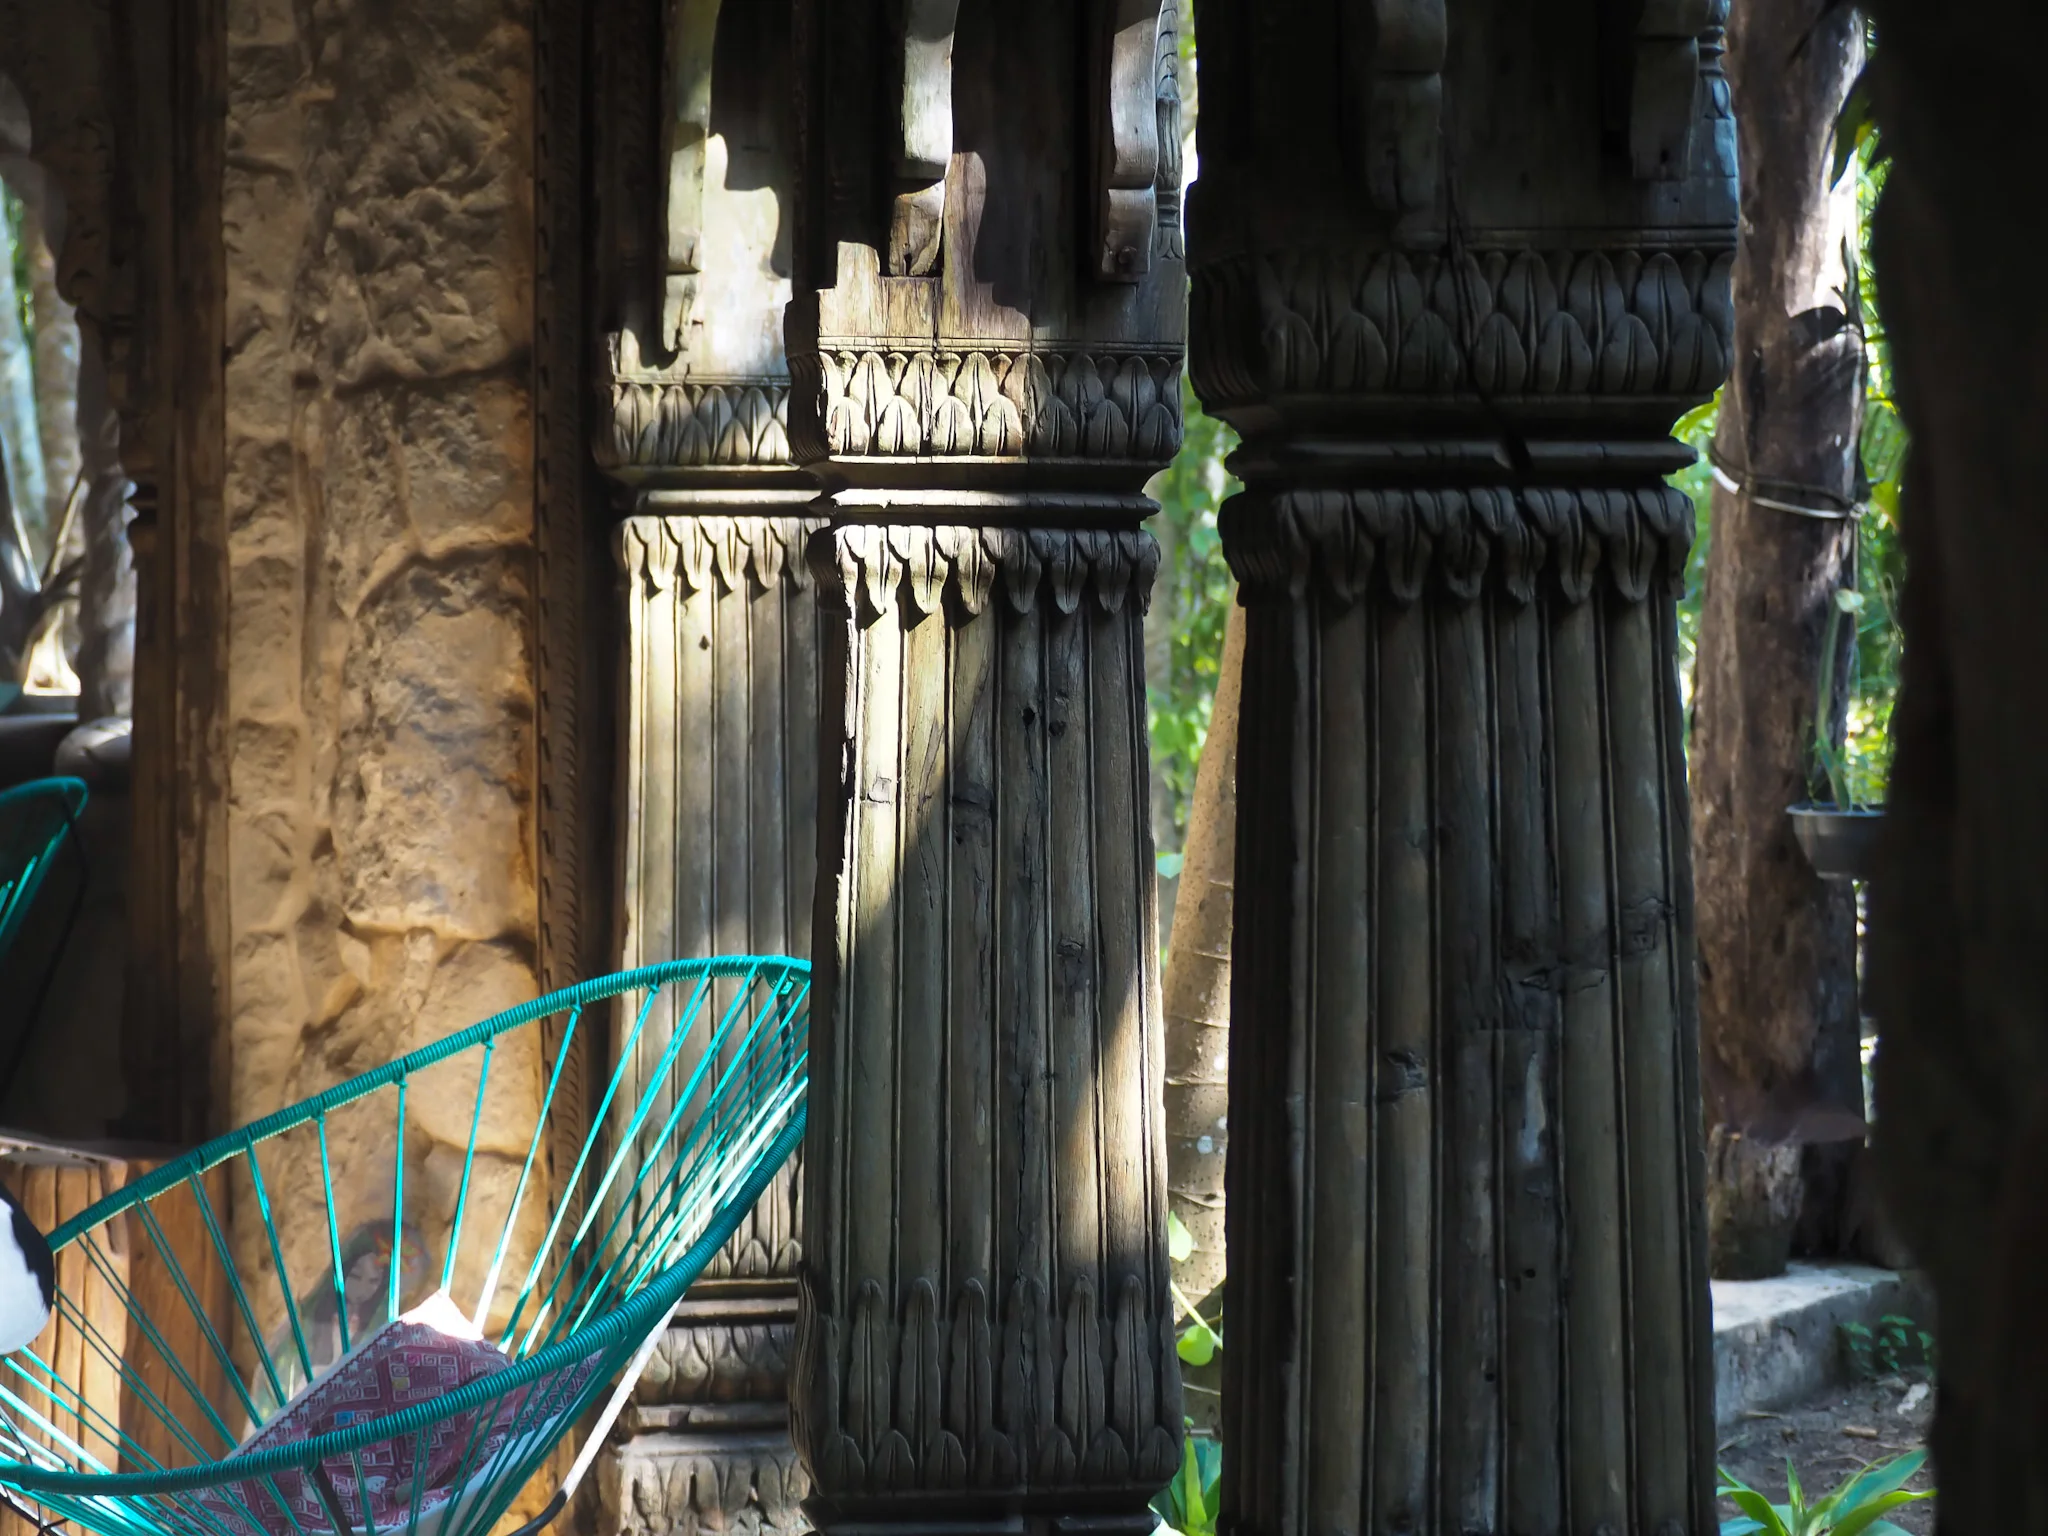 chair next to pillars in a natural setting in a retreat